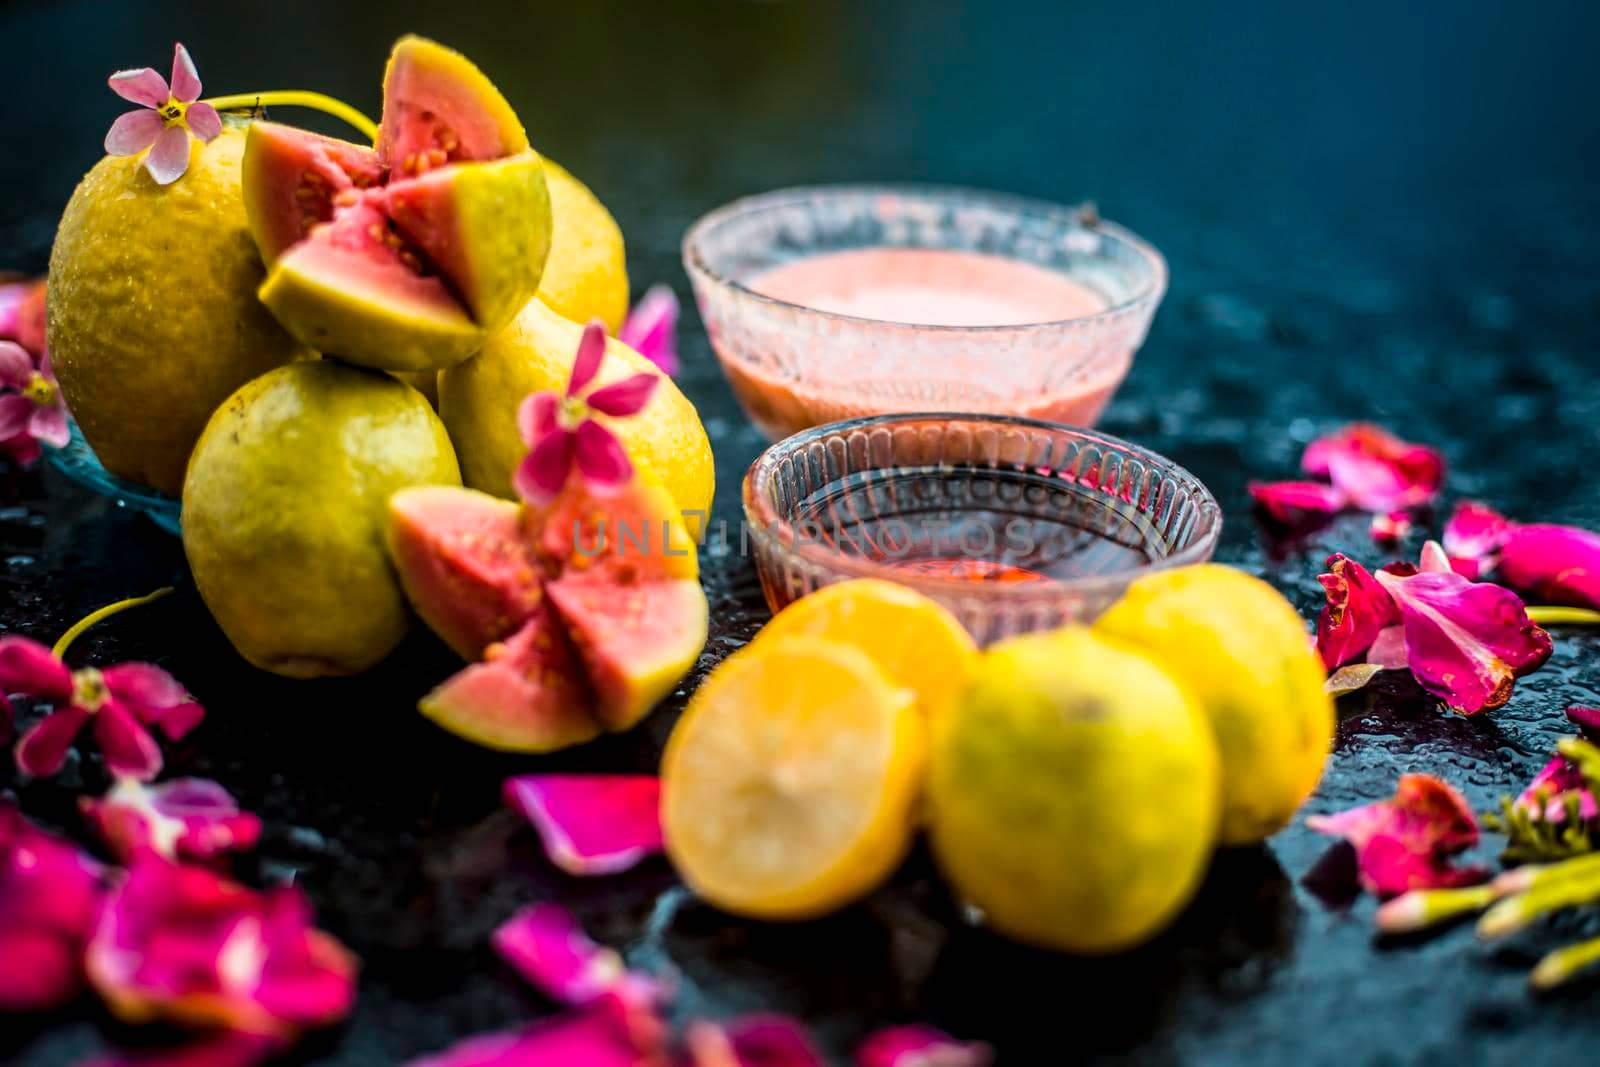 The easiest method to cure acne and scars with guava face mask consisting of guava pulp, honey, and some lemon juice.With ingredients on wooden surface in a glass bowl.;